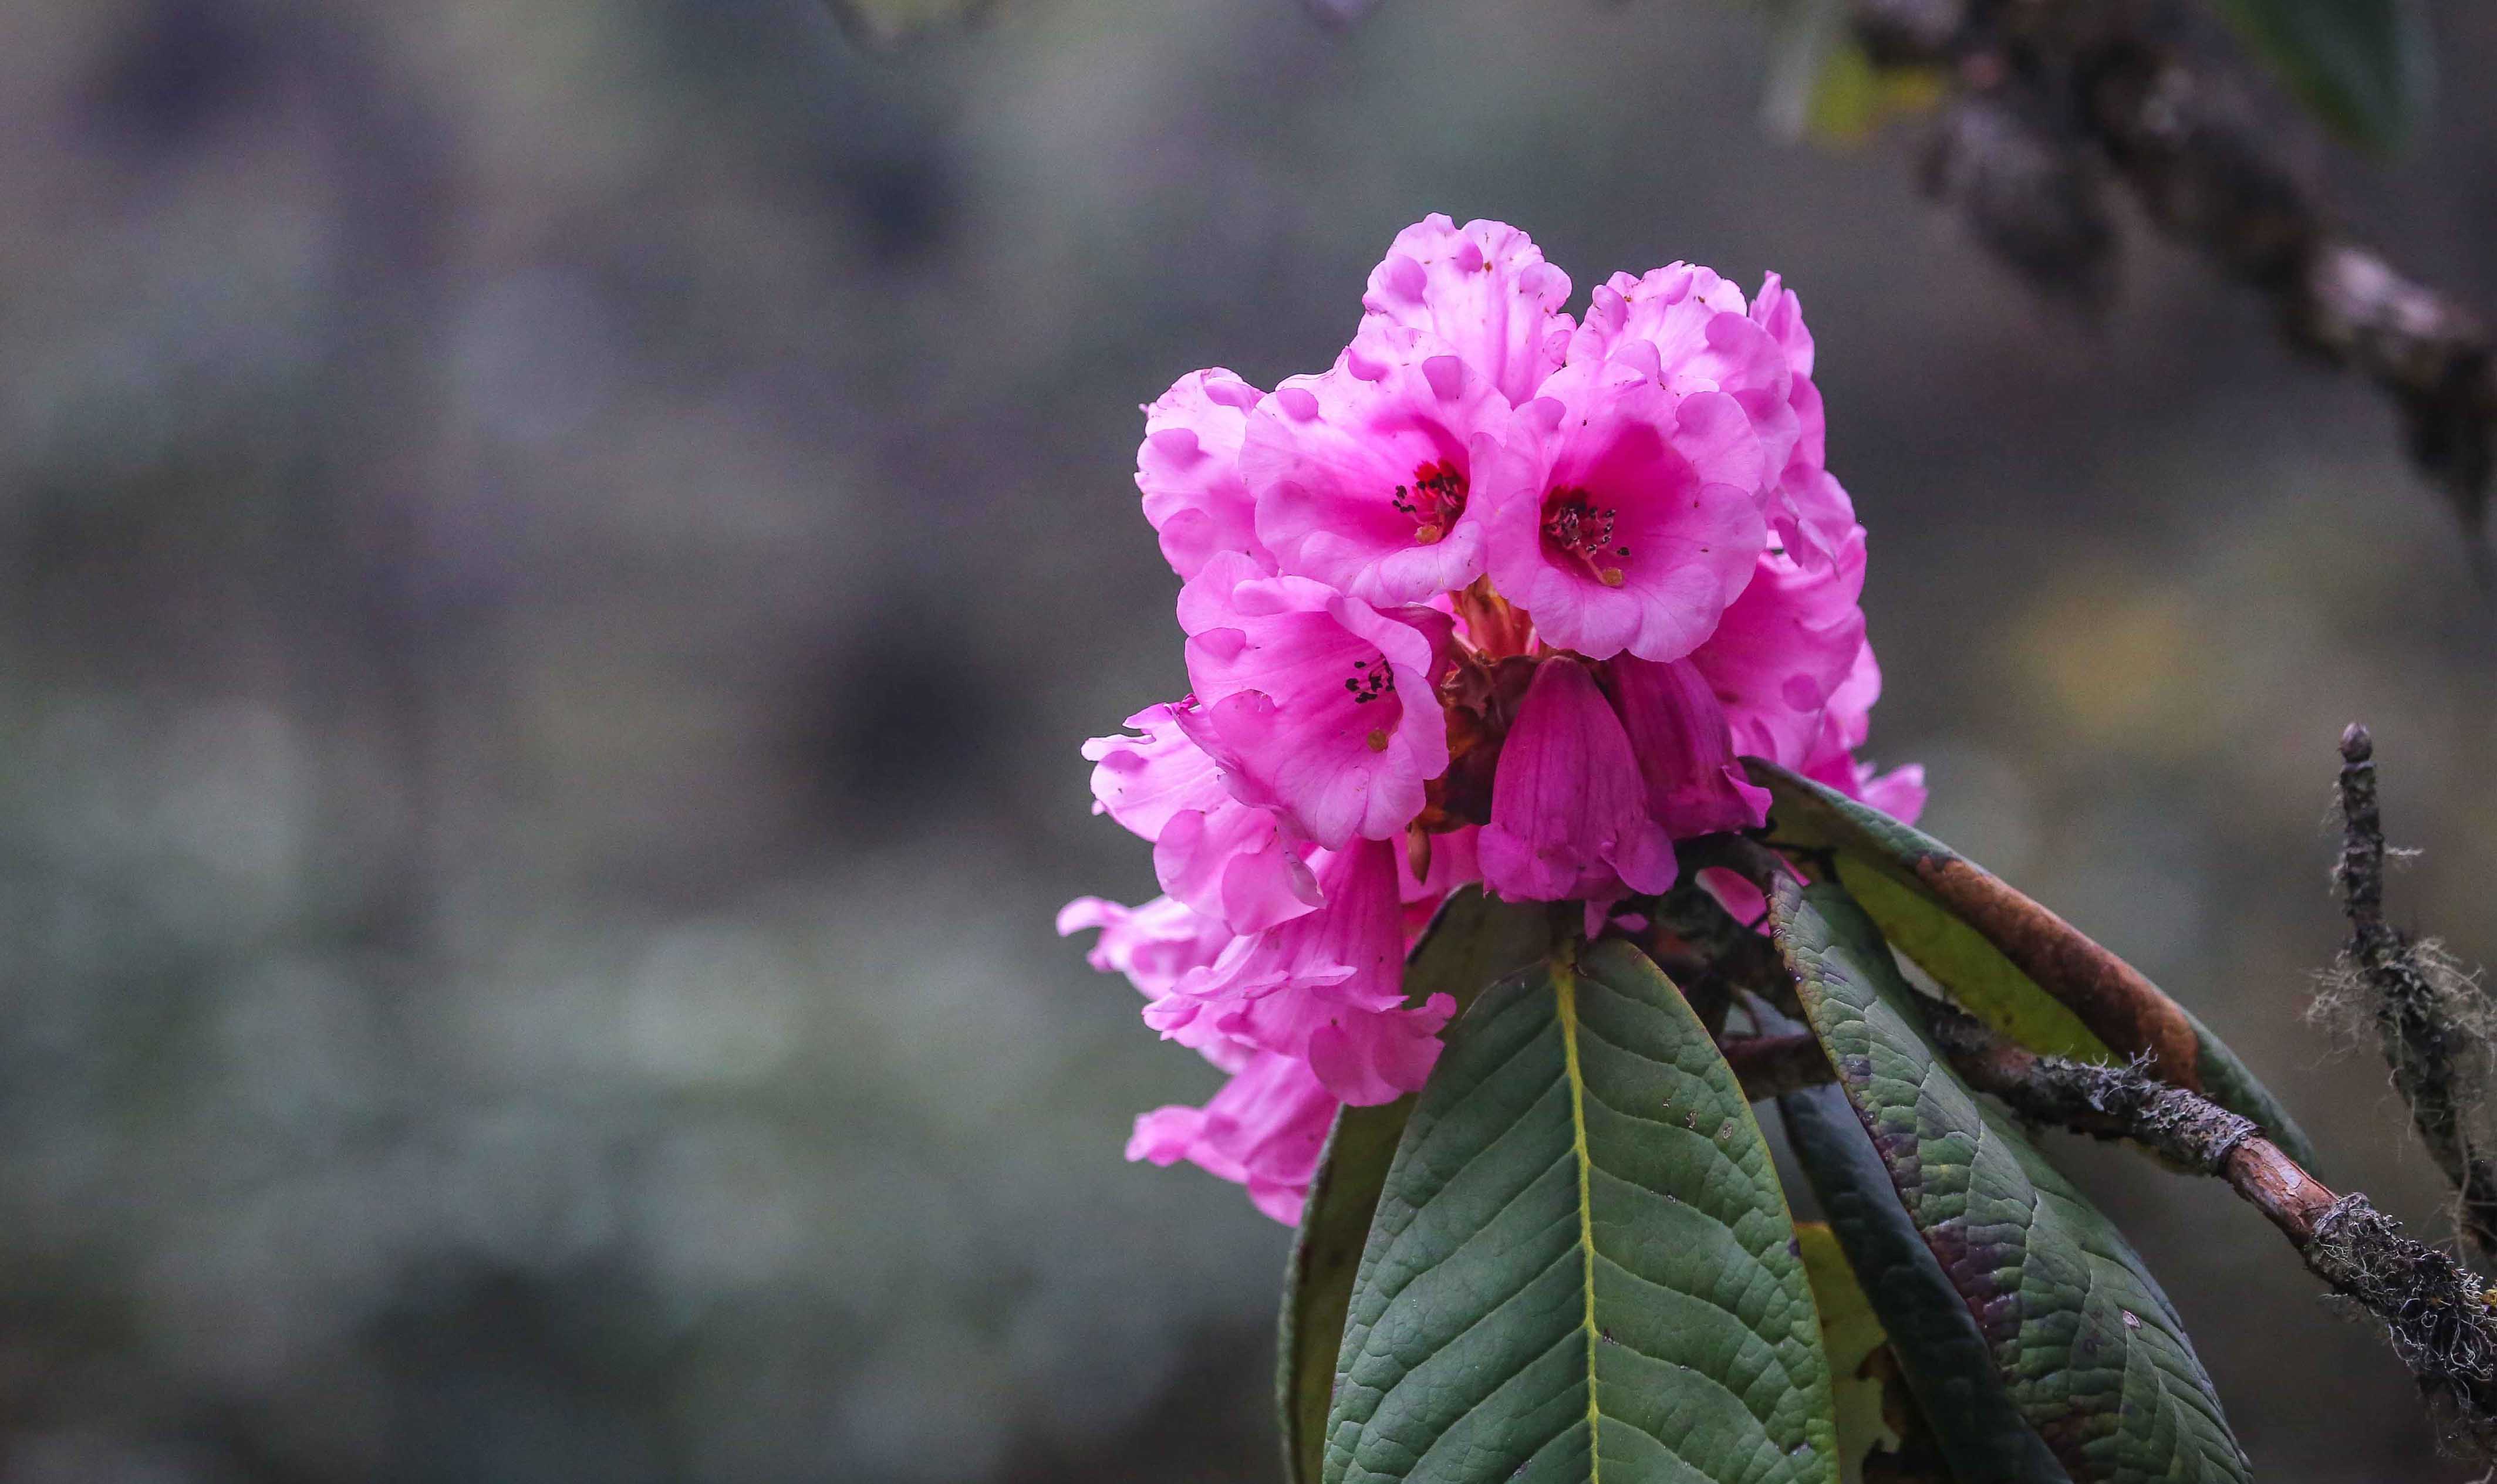 Rhododendron Festival – 17 to 19 Apr, 2020